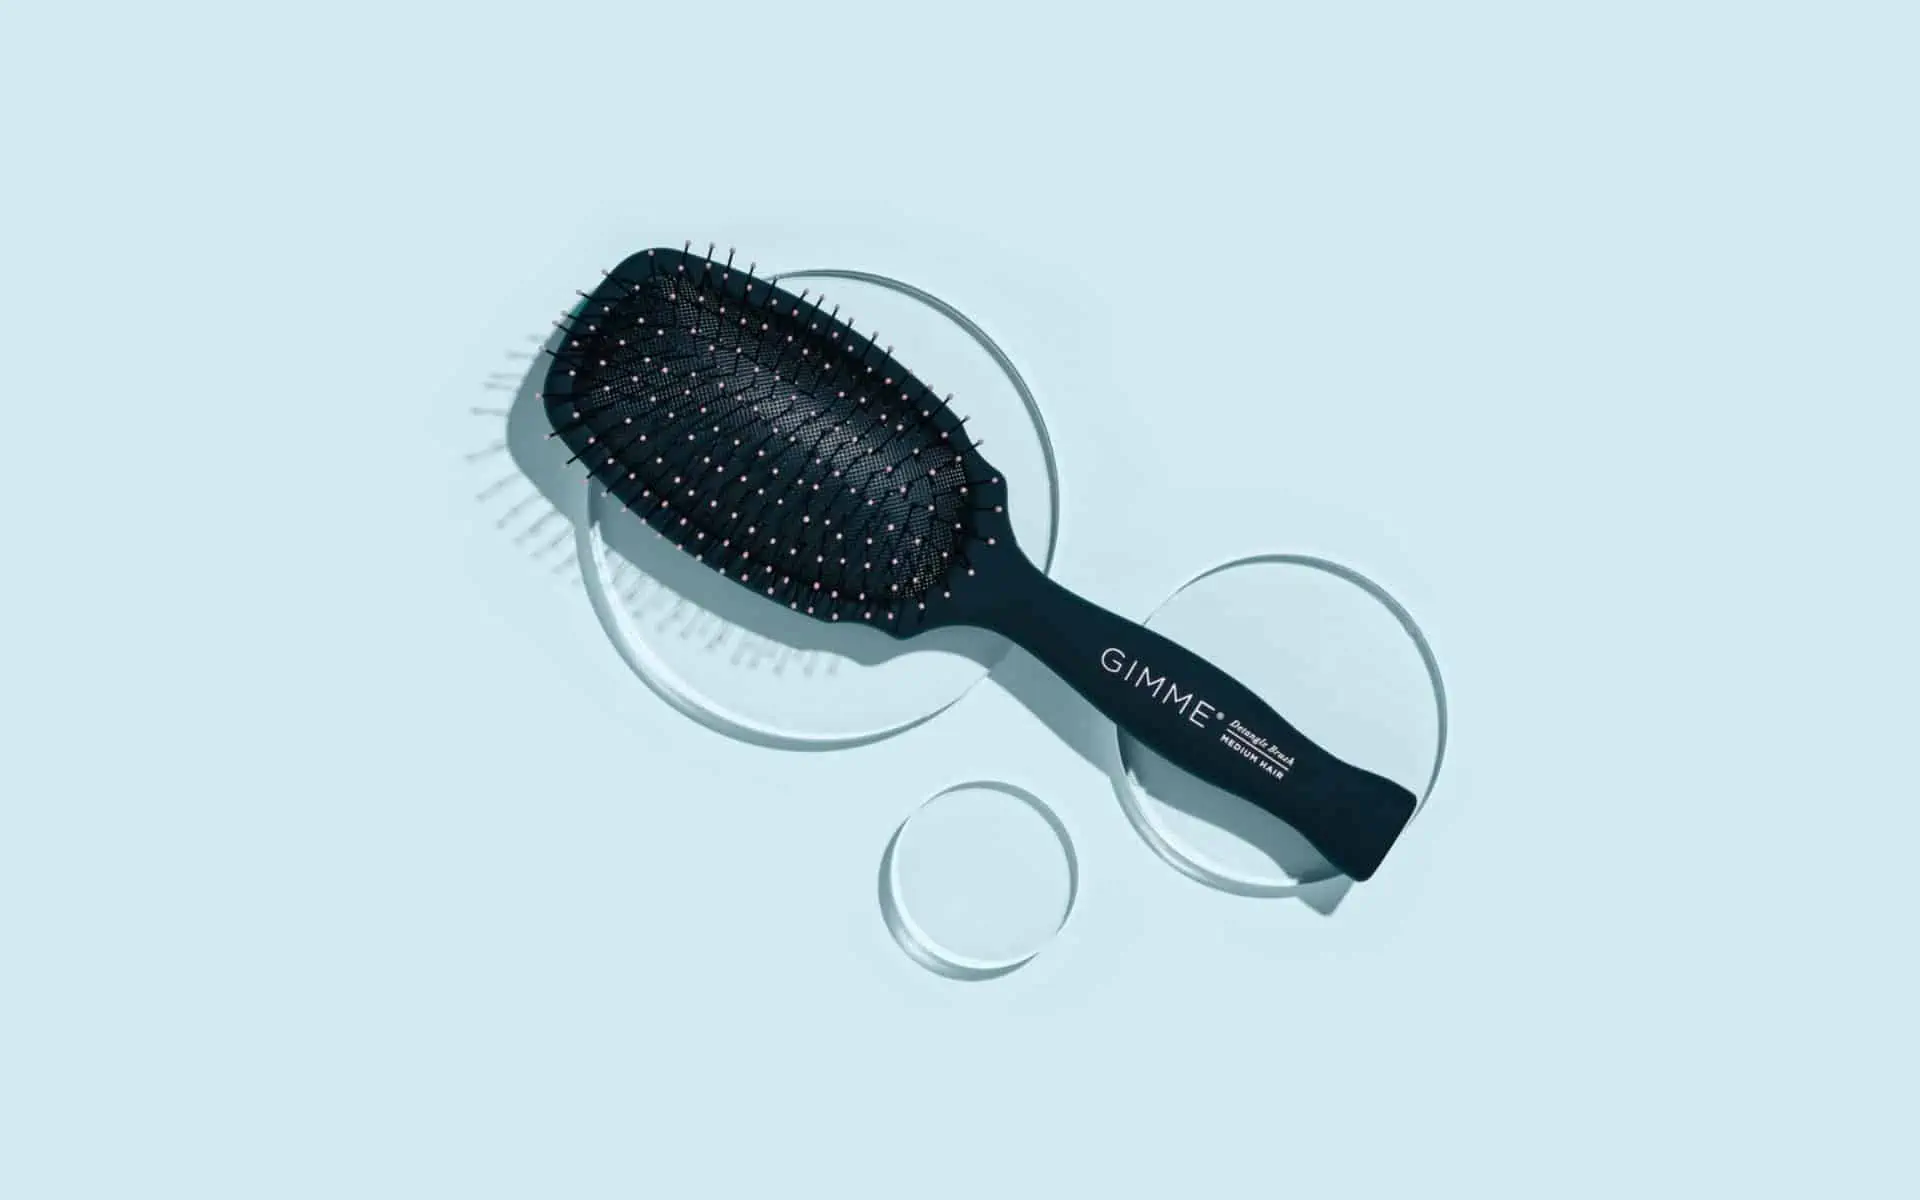 GIMME Beauty's Detangling hairbrush is innovative and 'game-changing'